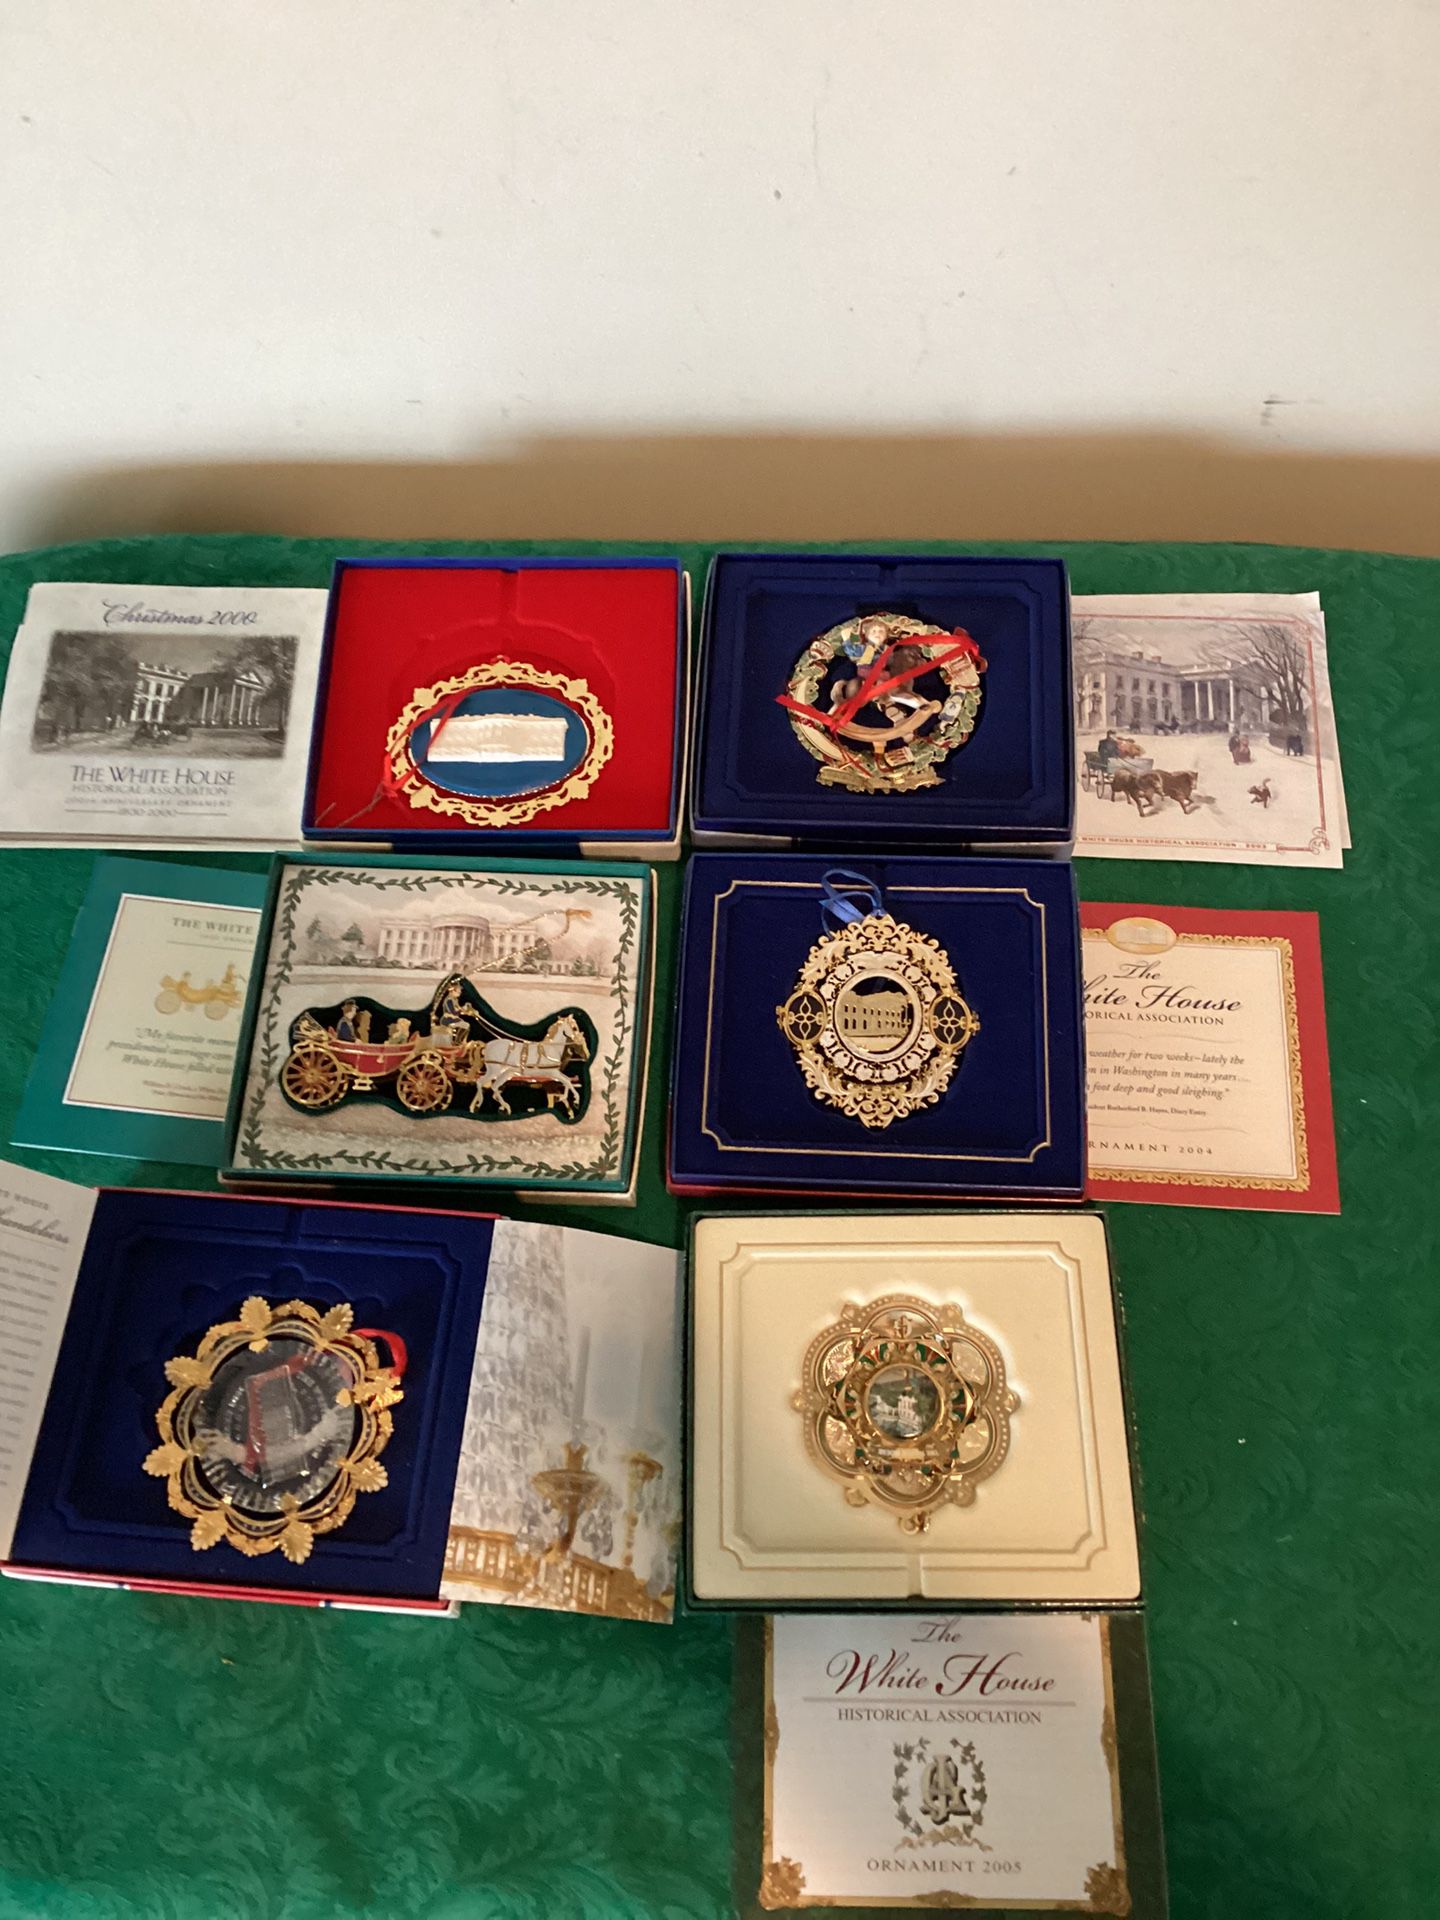 White House Historical Association Christmas Ornaments Lot Of 6 W/Boxes 2000-05